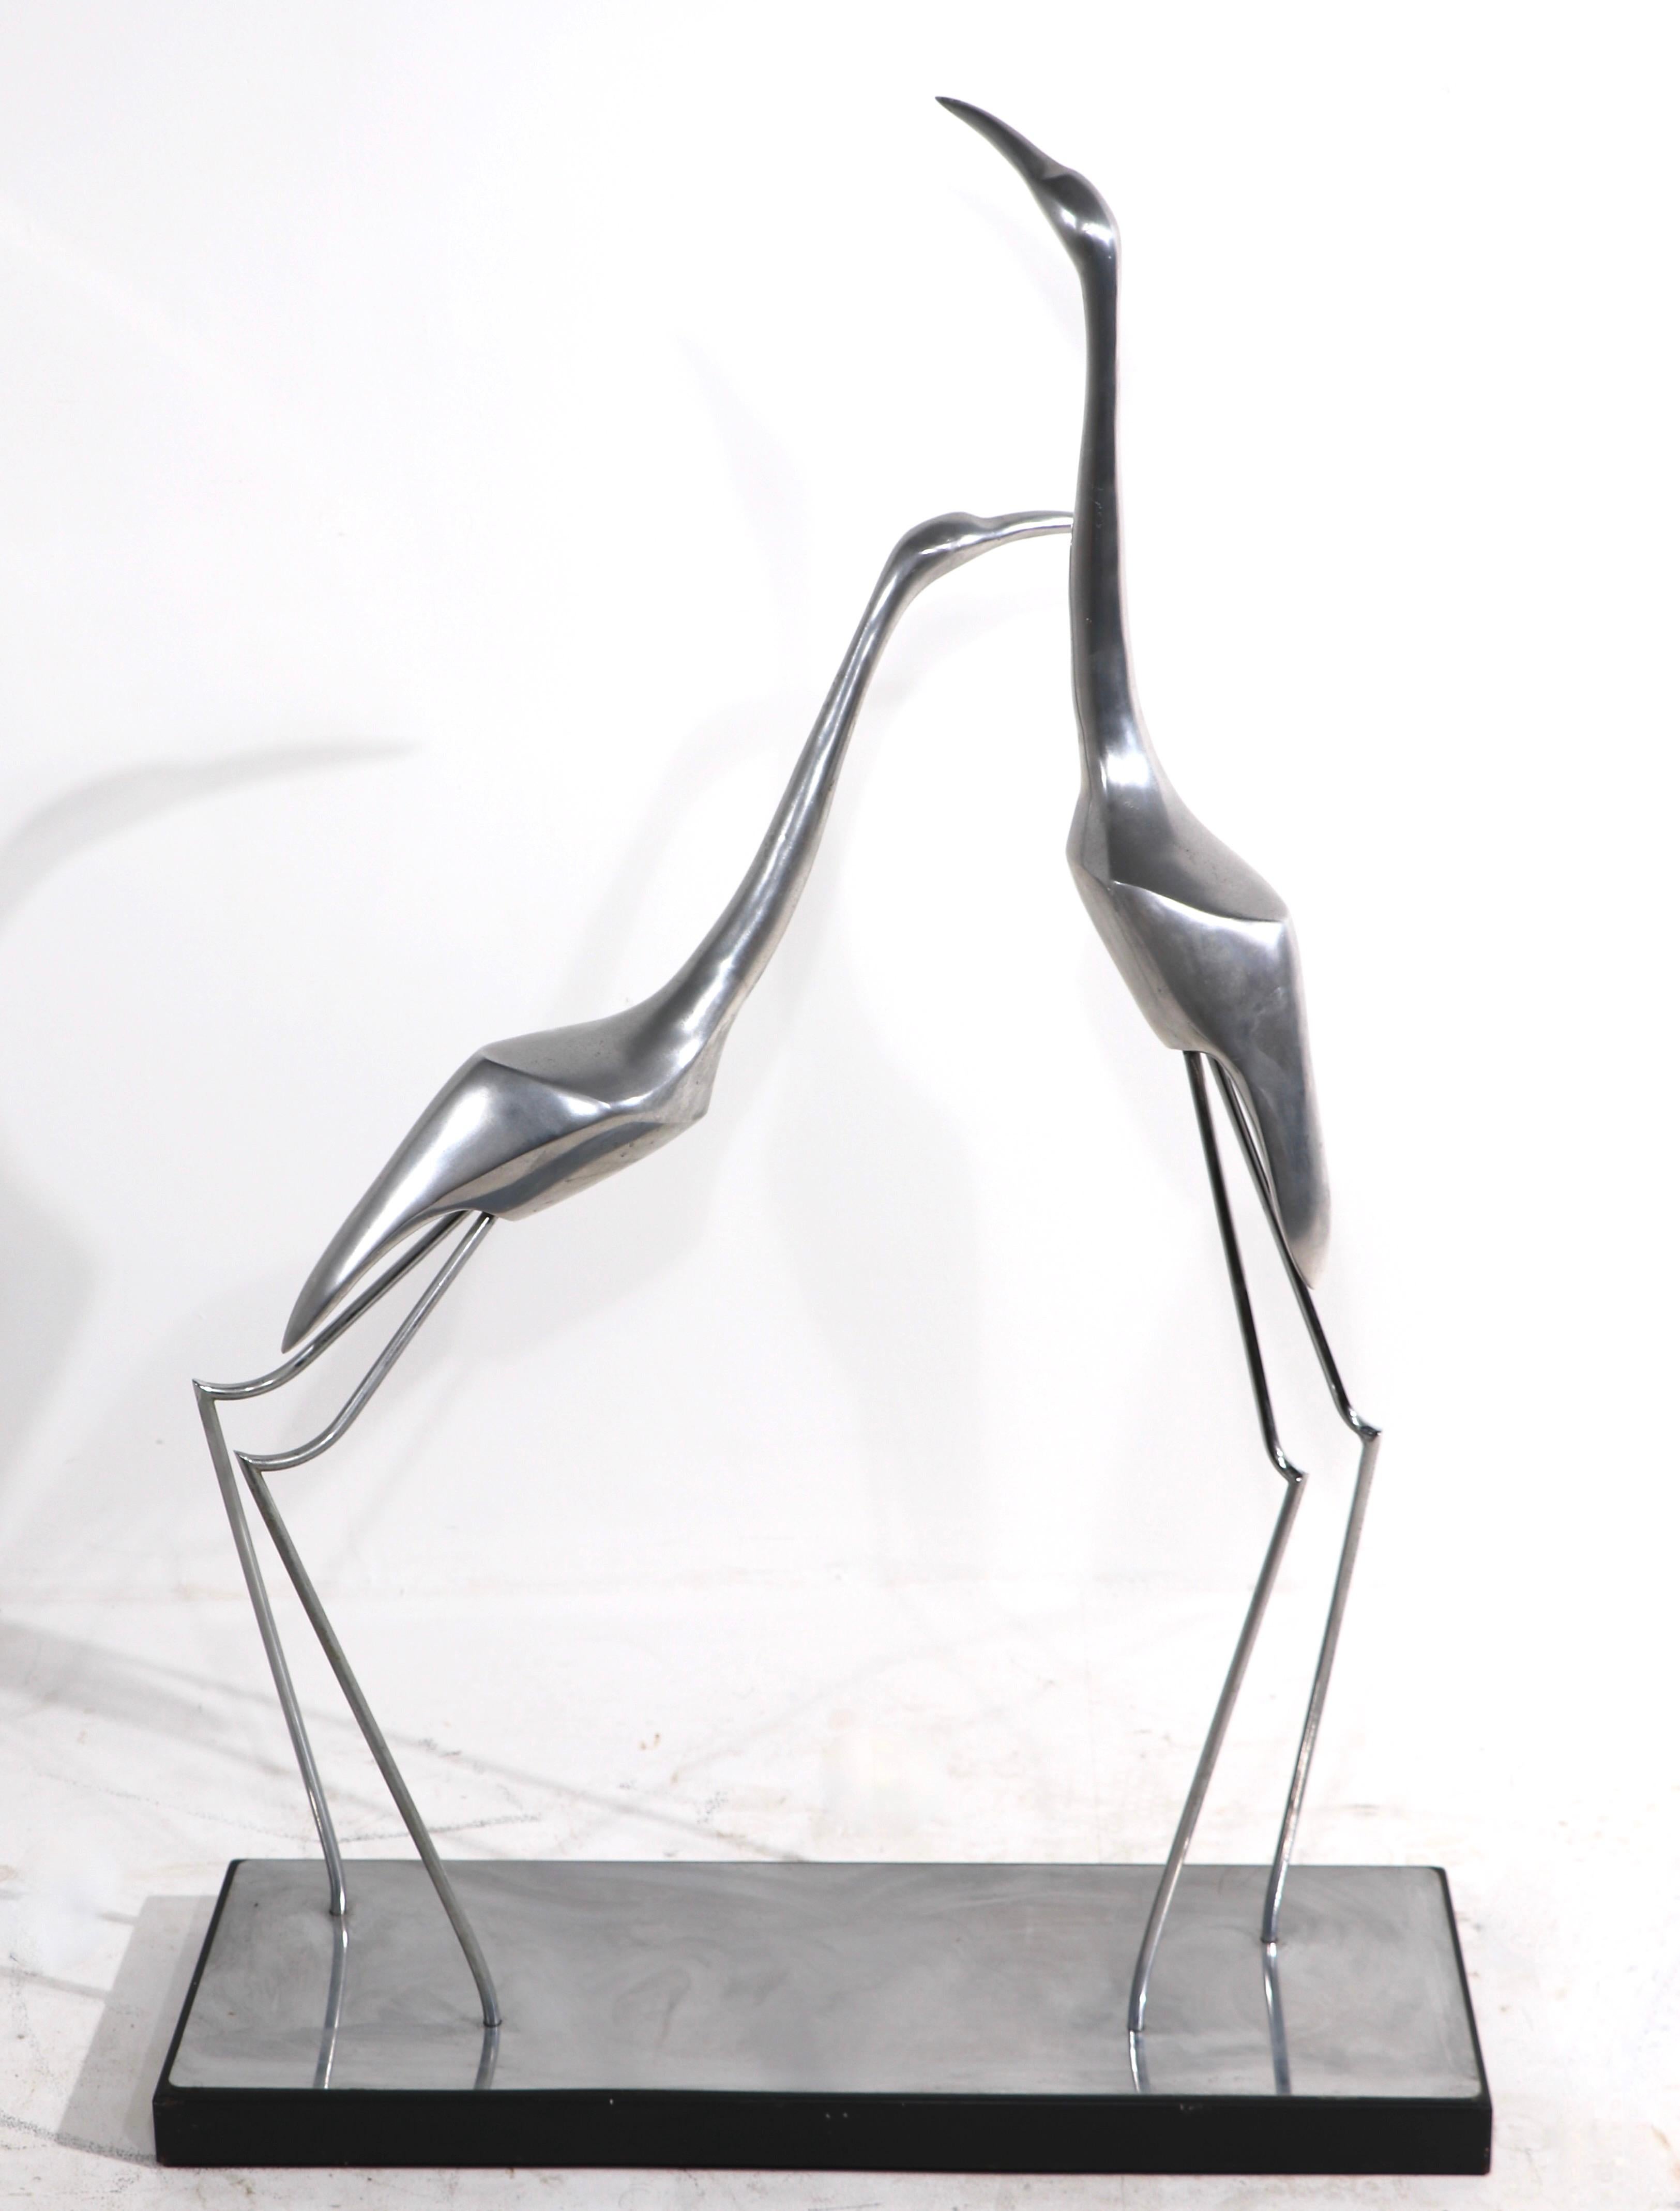 Impressive sculpture depicting two stylized Herons of cast aluminum on a rectangular base ( 30 in. W X 10 in. D ). This example is in very good original condition showing only light cosmetic wear normal and consistent with age. Made by Curtis Jere